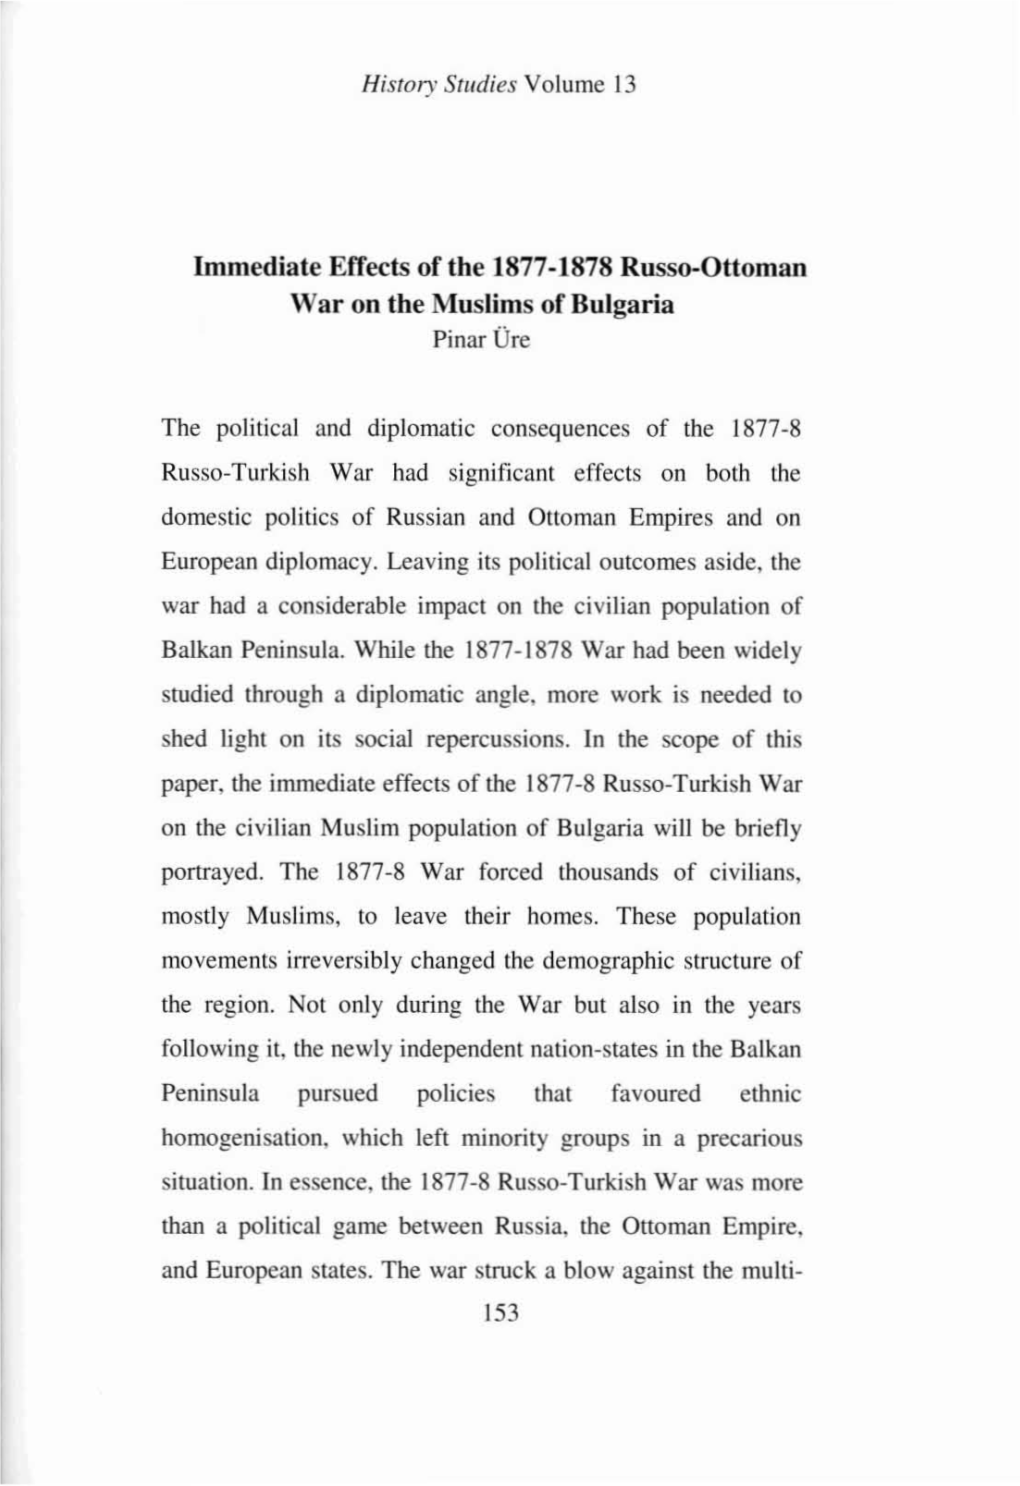 Immediate Effects of the 1877-1878 Russo-Ouoman War on The